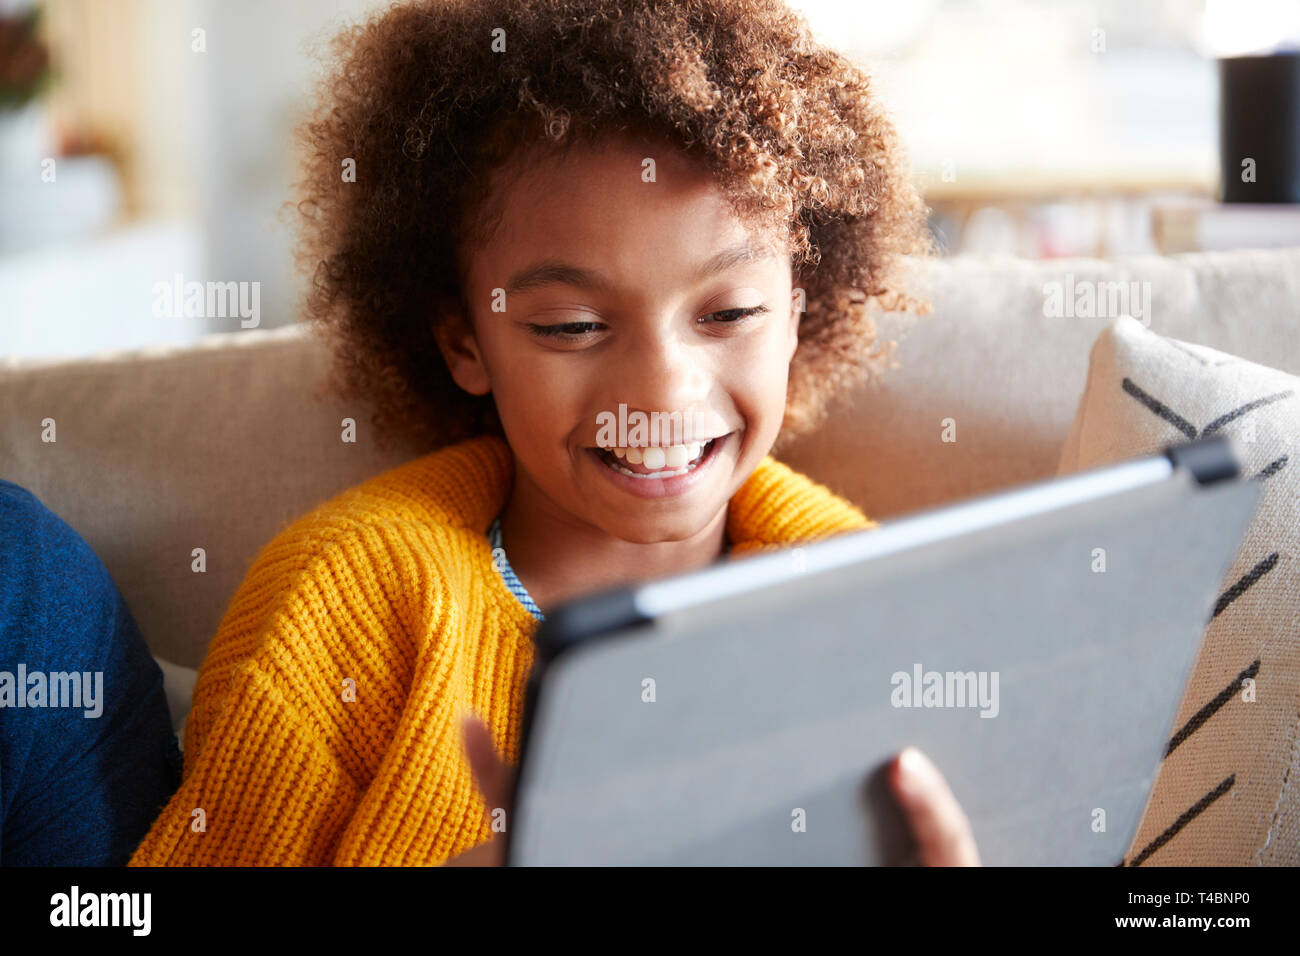 Portrait of pre-teen girl looking at tablet computer screen laughing, close up, selective focus Stock Photo